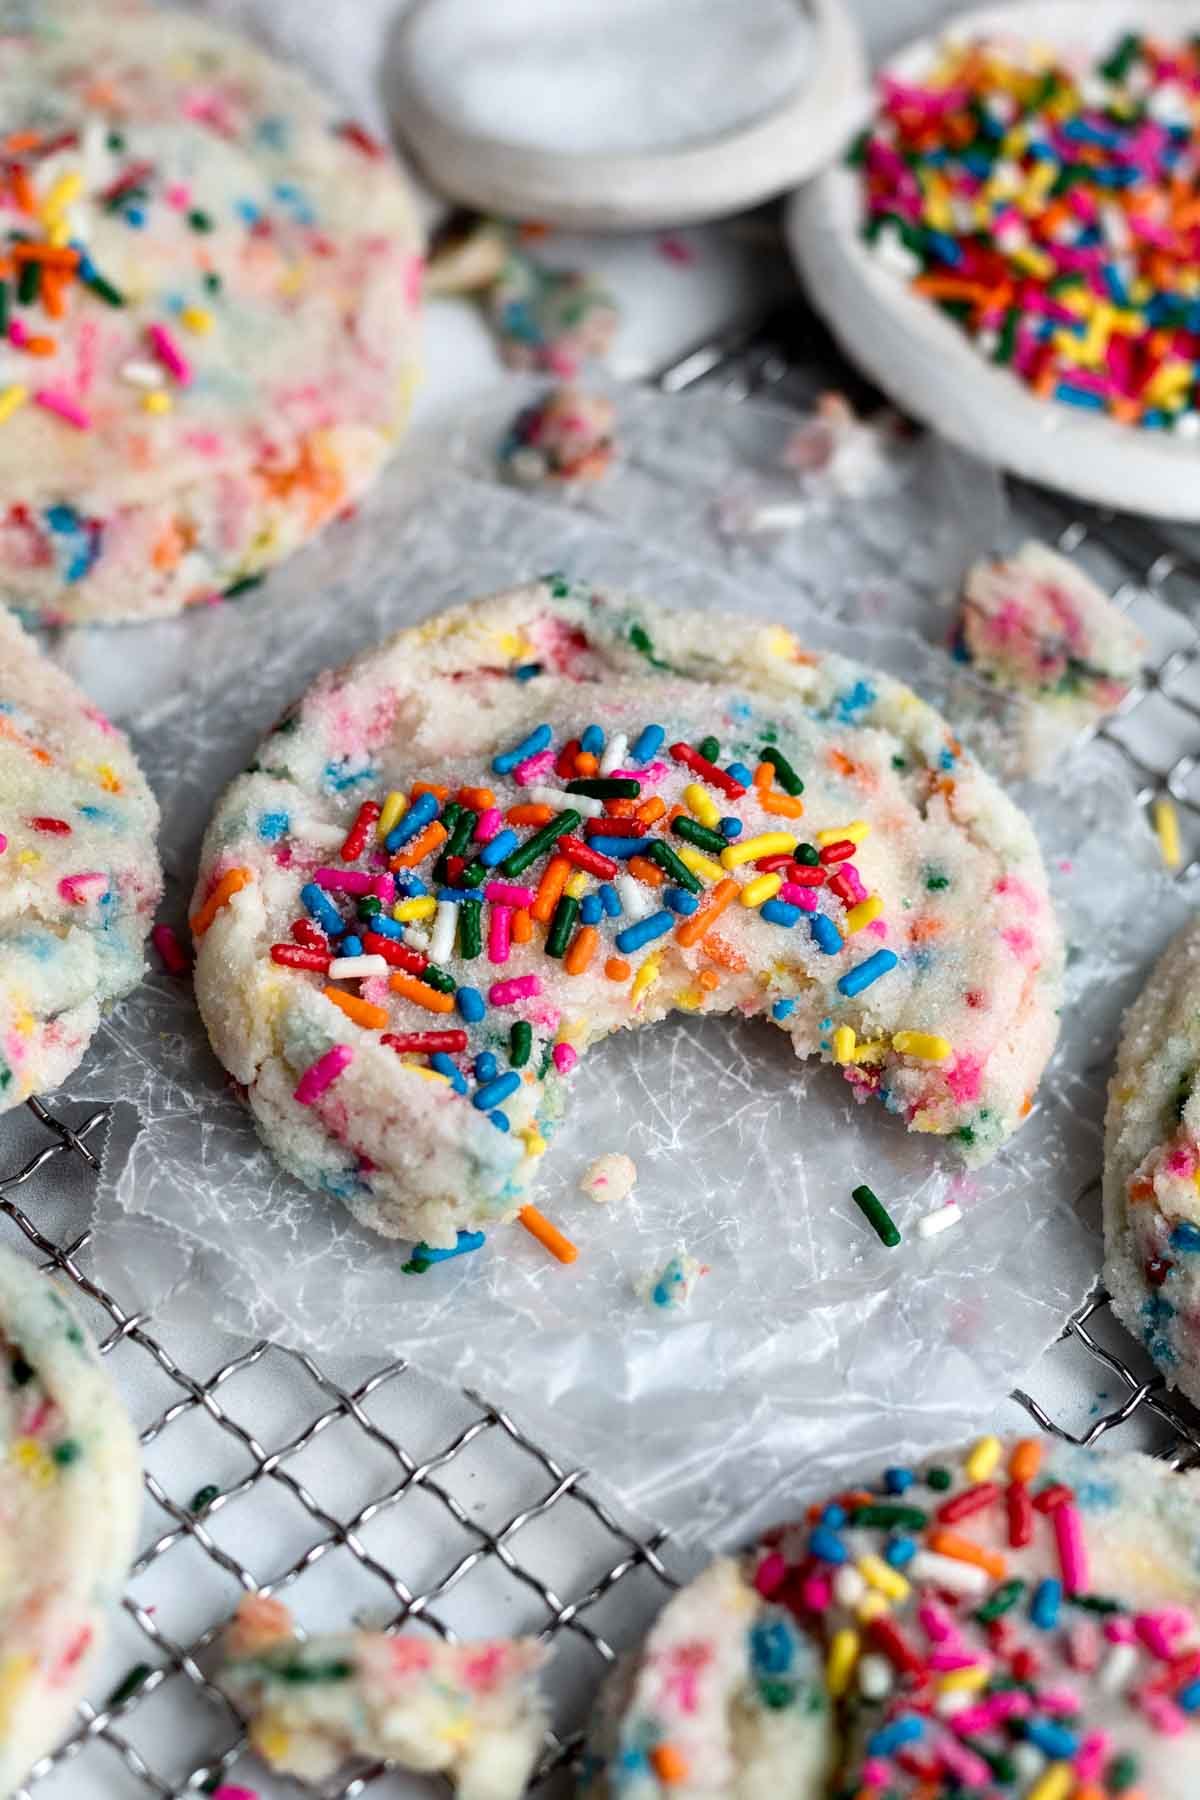 A Sprinkle Sugar Cookie with a bite taken out.